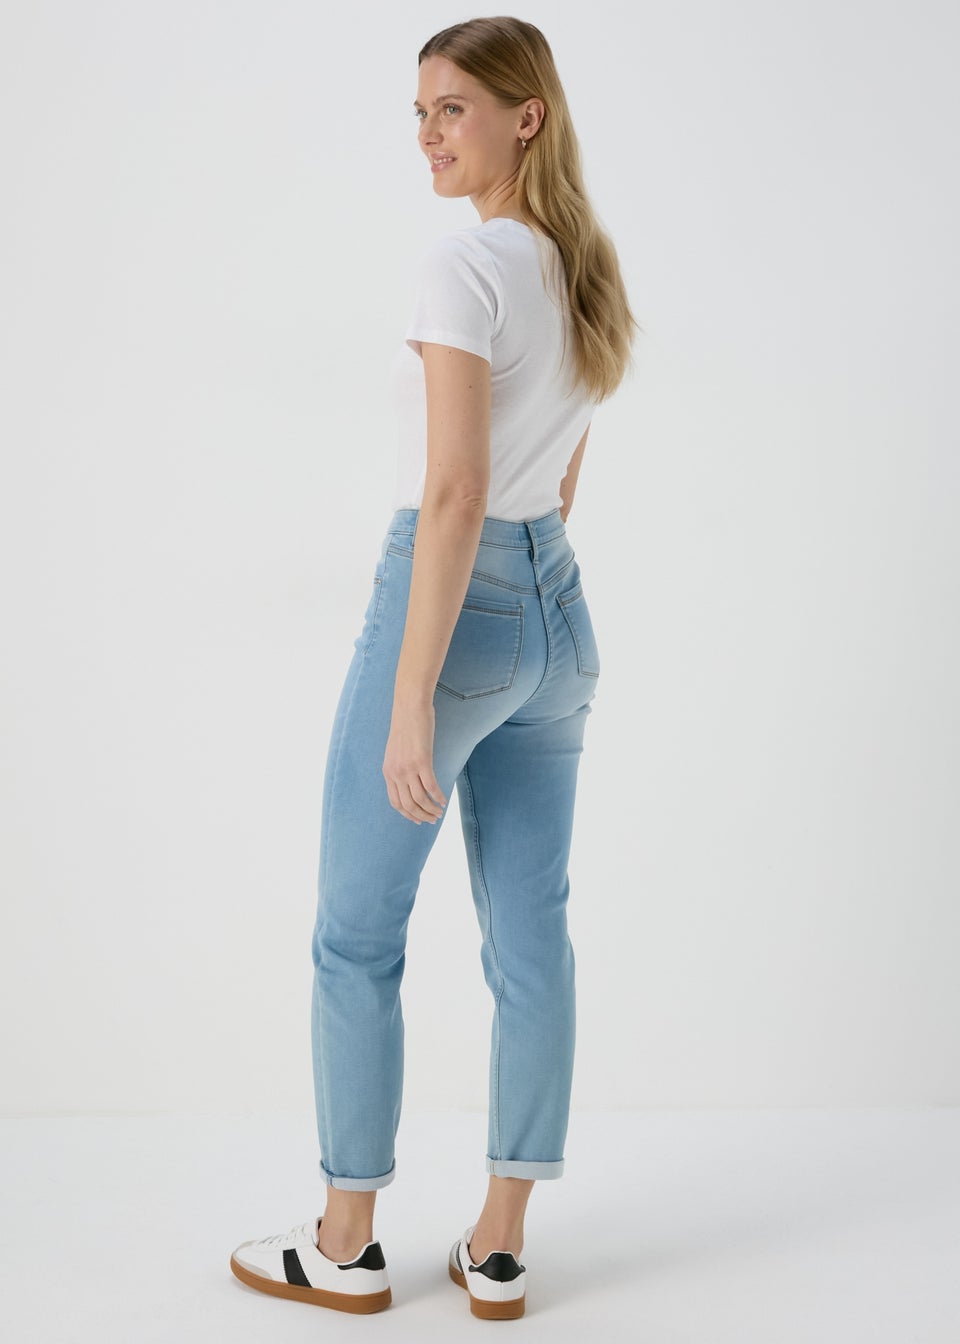 Light Wash Jolie Relaxed Fit Jeans